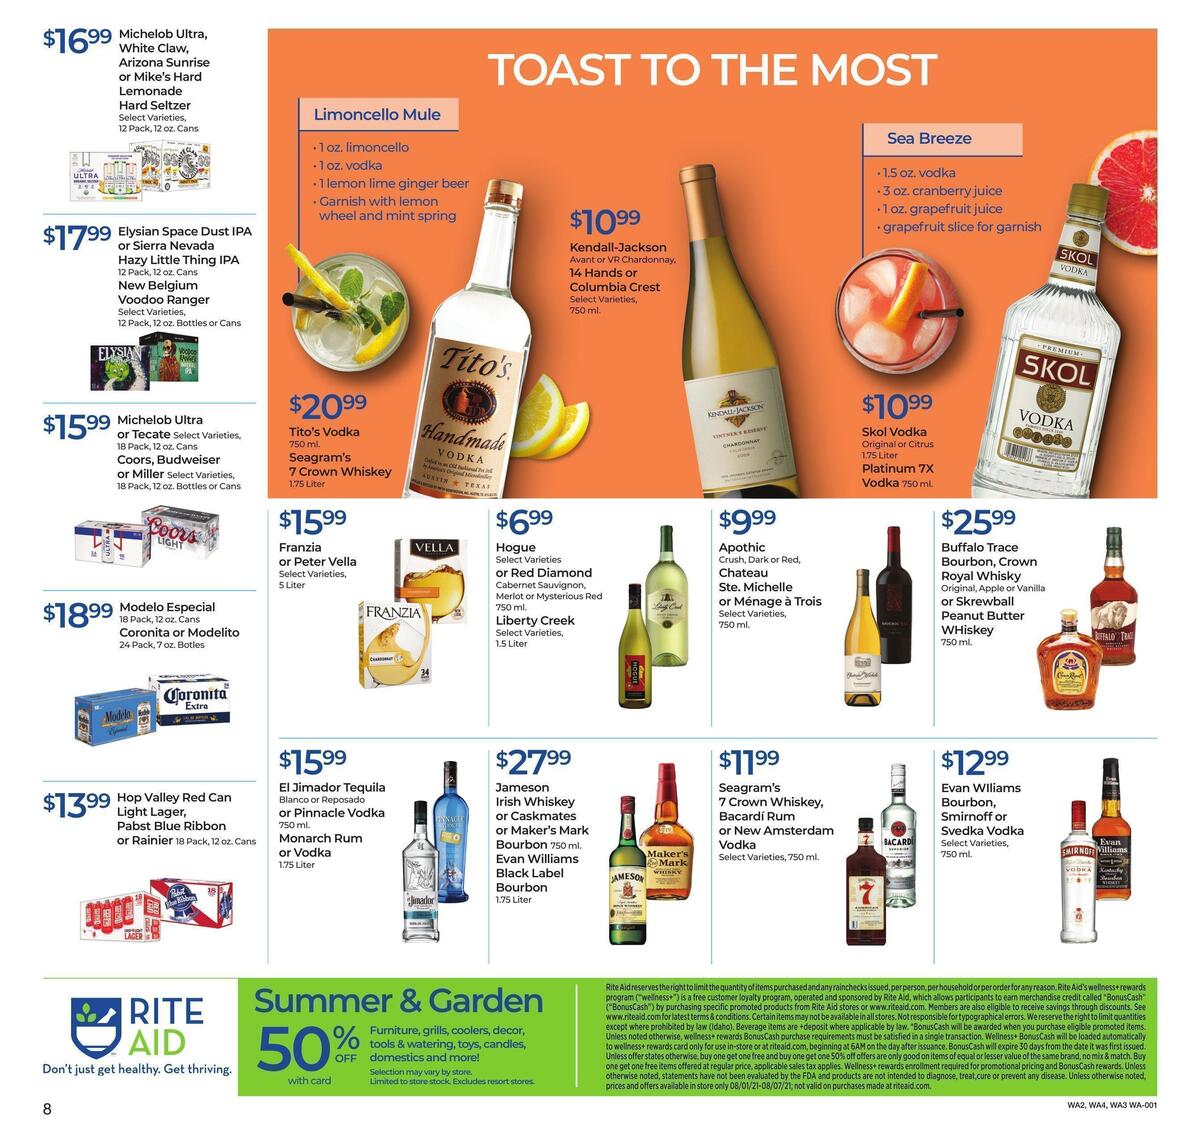 Rite Aid Weekly Ad from August 1